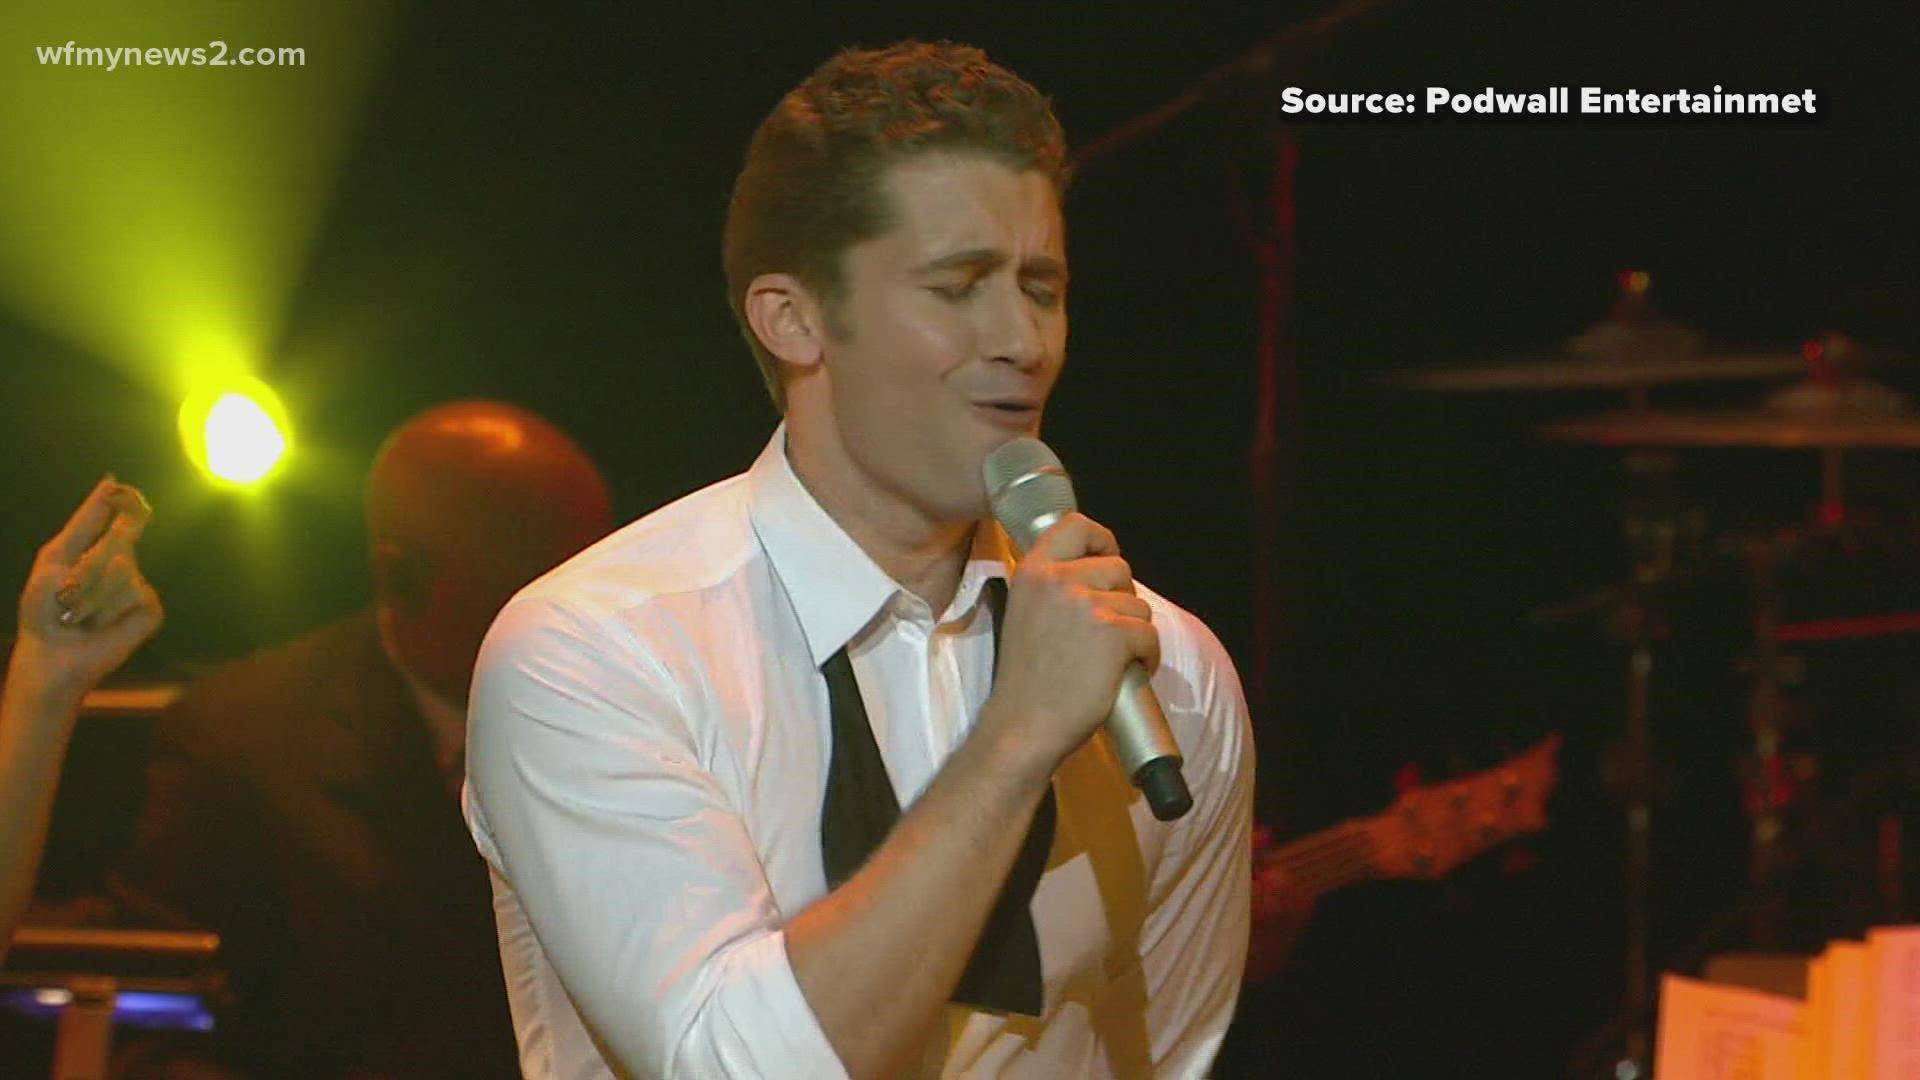 Former “Glee” actor Matthew Morrison will perform with the Greensboro Symphony at the Tanger Center.